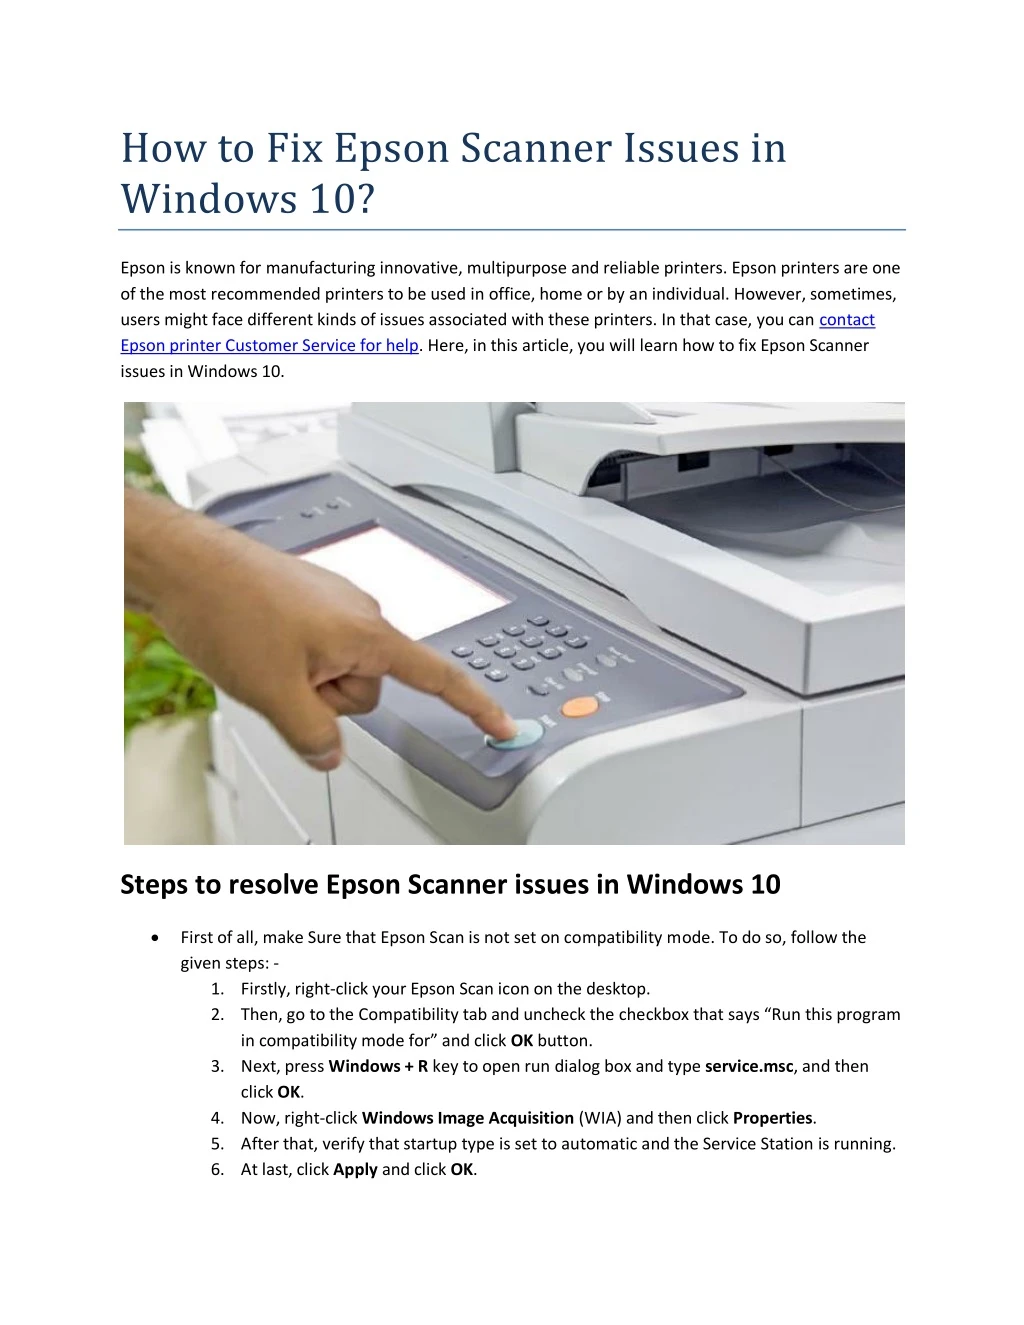 how to fix epson scanner issues in windows 10